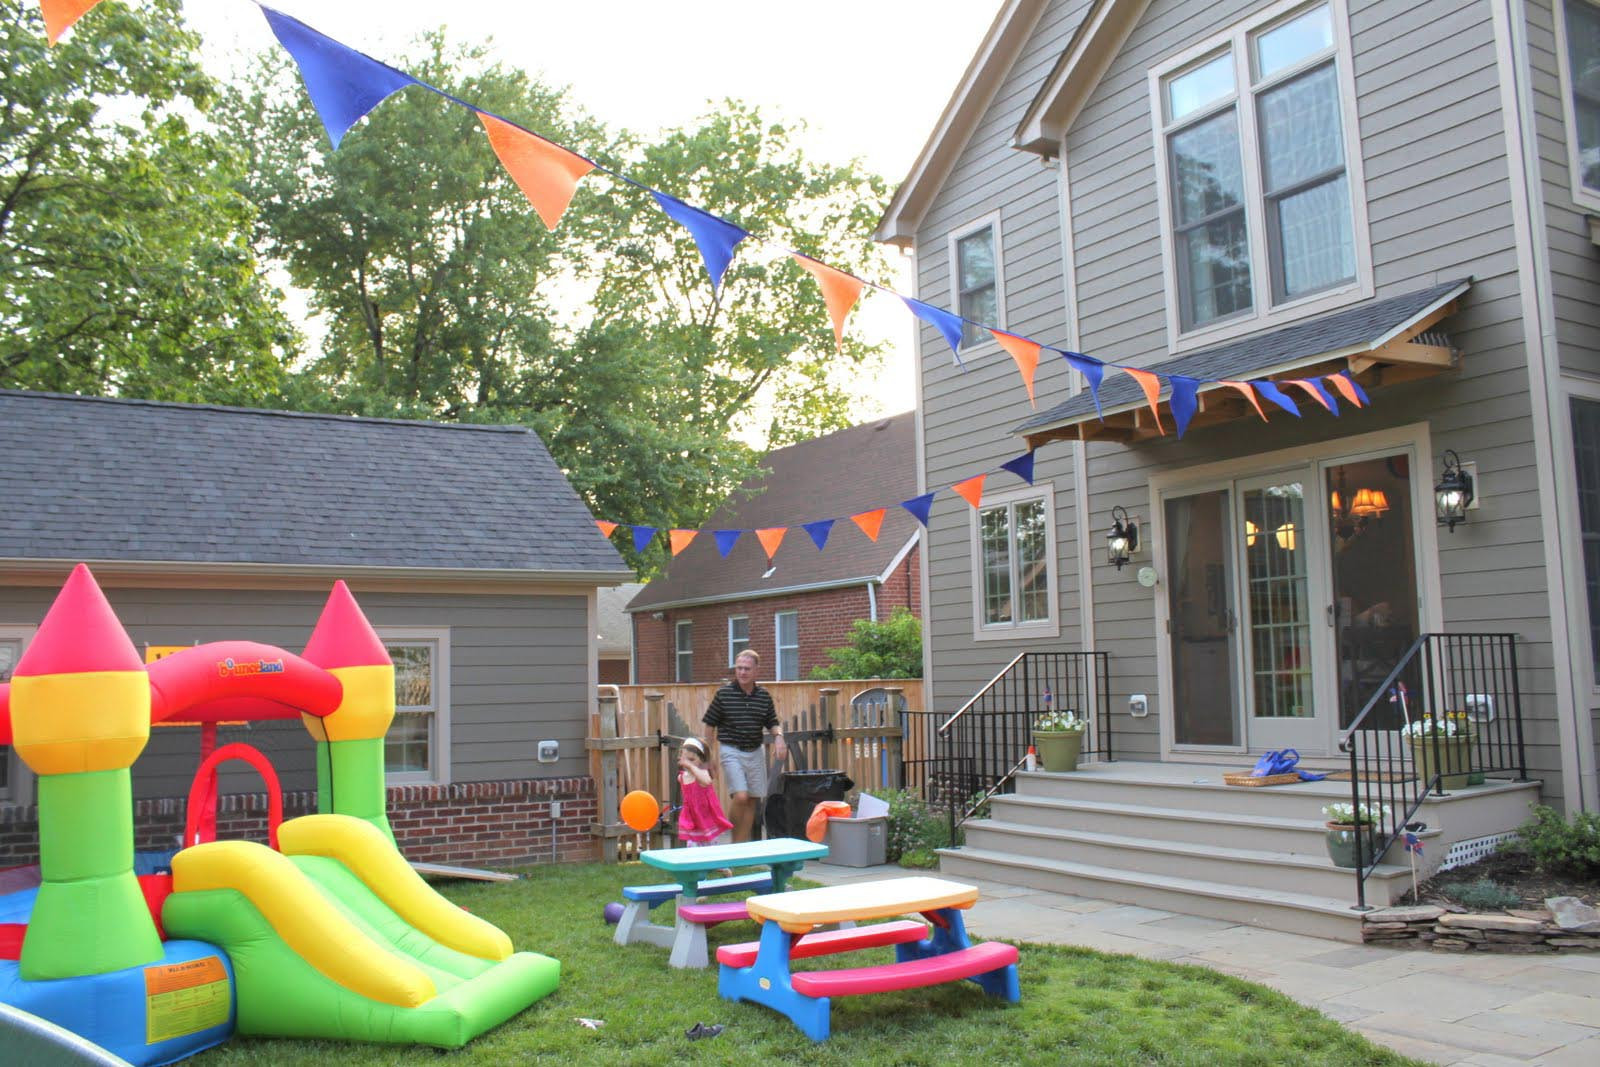 Backyard Birthday Party Ideas For 3 Year Old
 What Idea to Choose for a Toddler Birthday Party